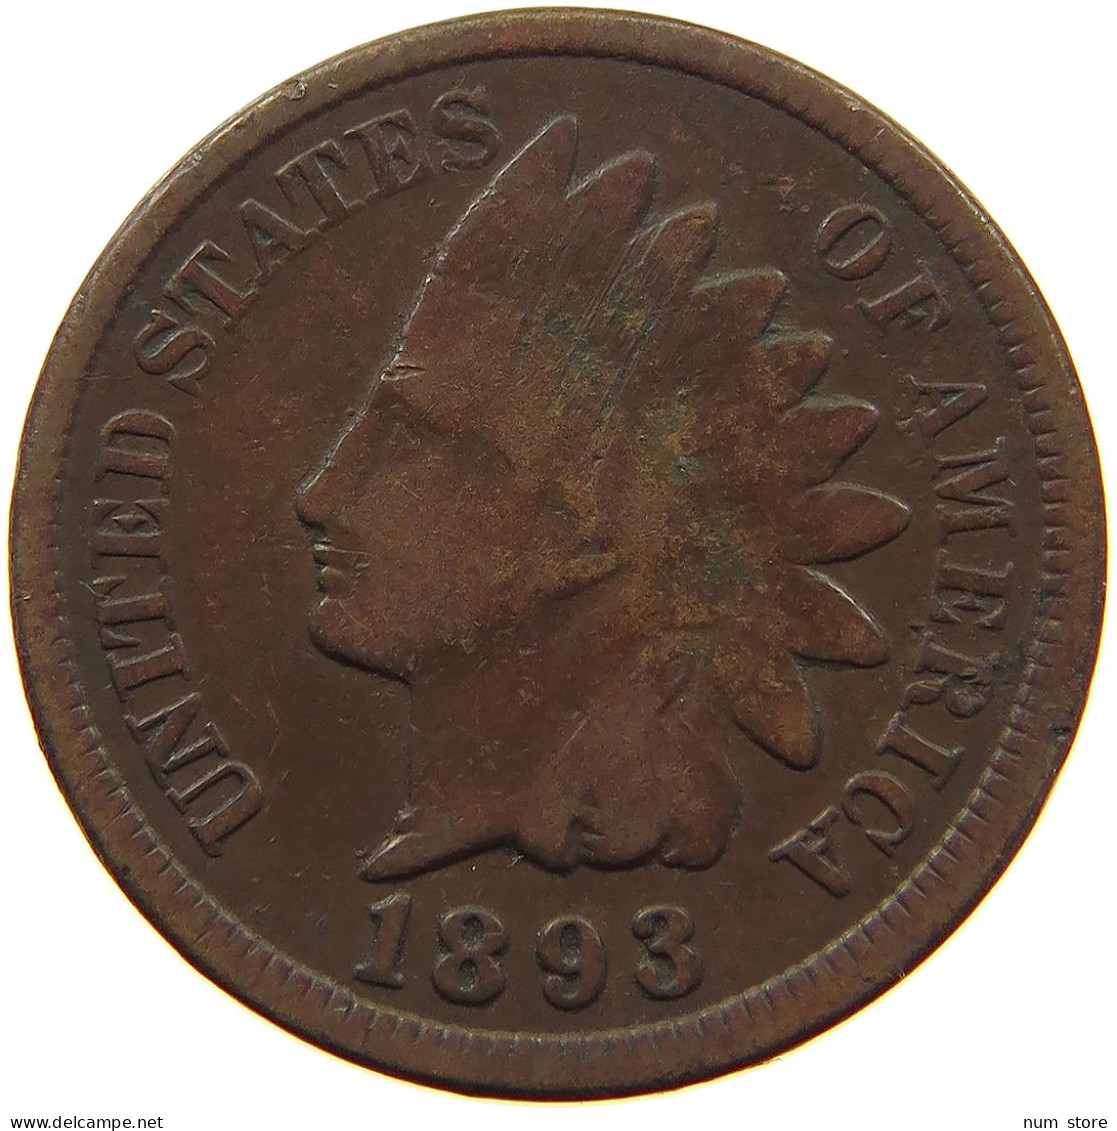 UNITED STATES OF AMERICA CENT 1893 INDIAN HEAD #s063 0405 - 1859-1909: Indian Head